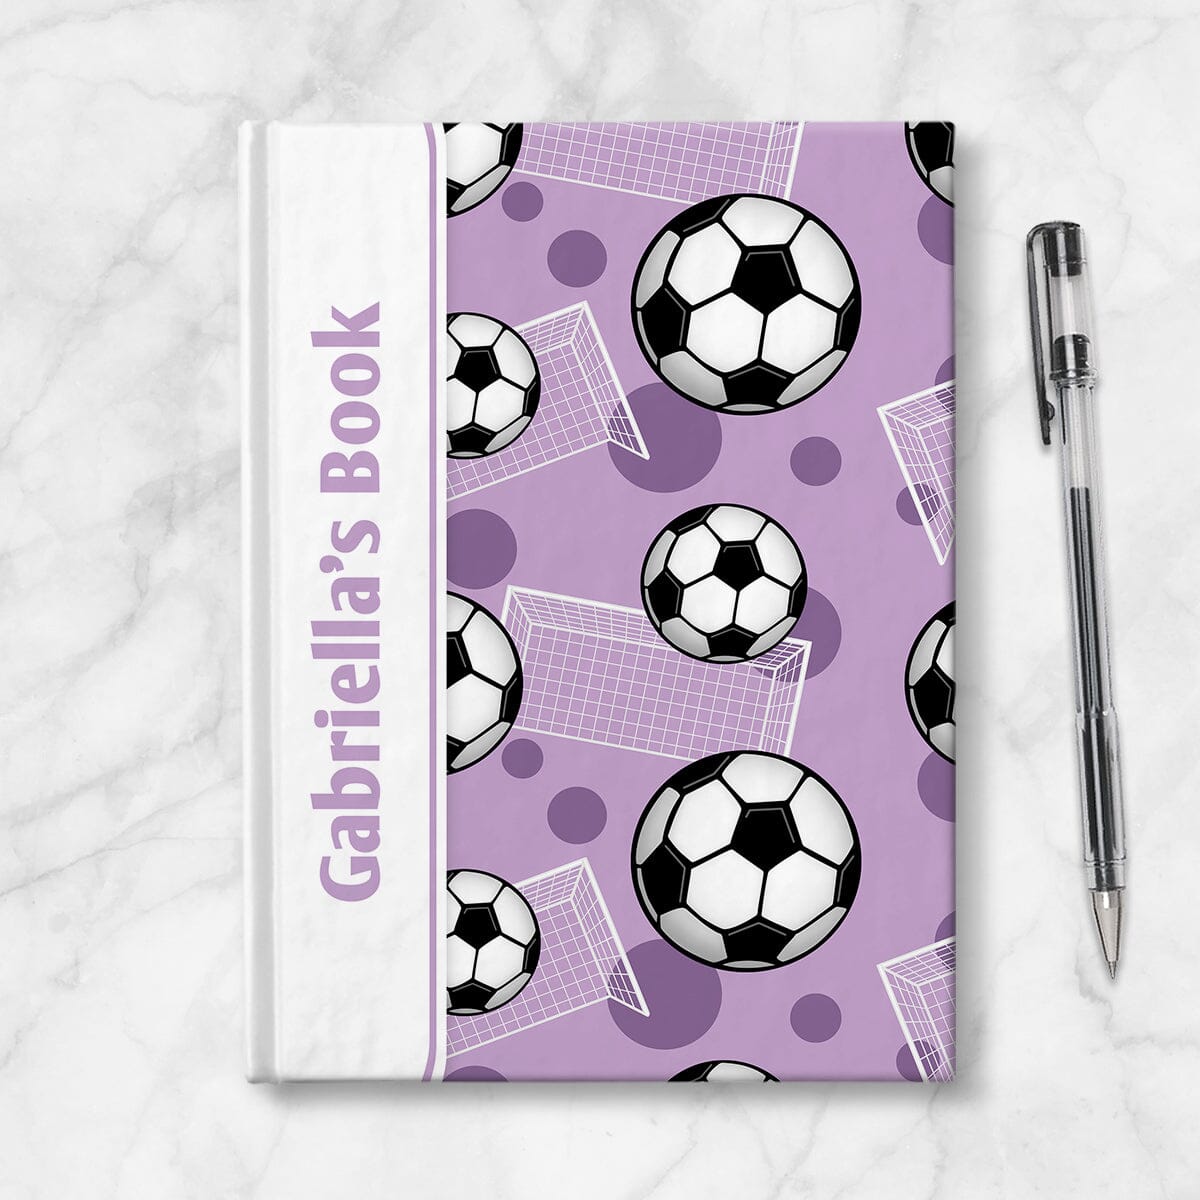 Personalized Purple Soccer Journal at Artistically Invited. Image shows the book on a countertop next to a pen.